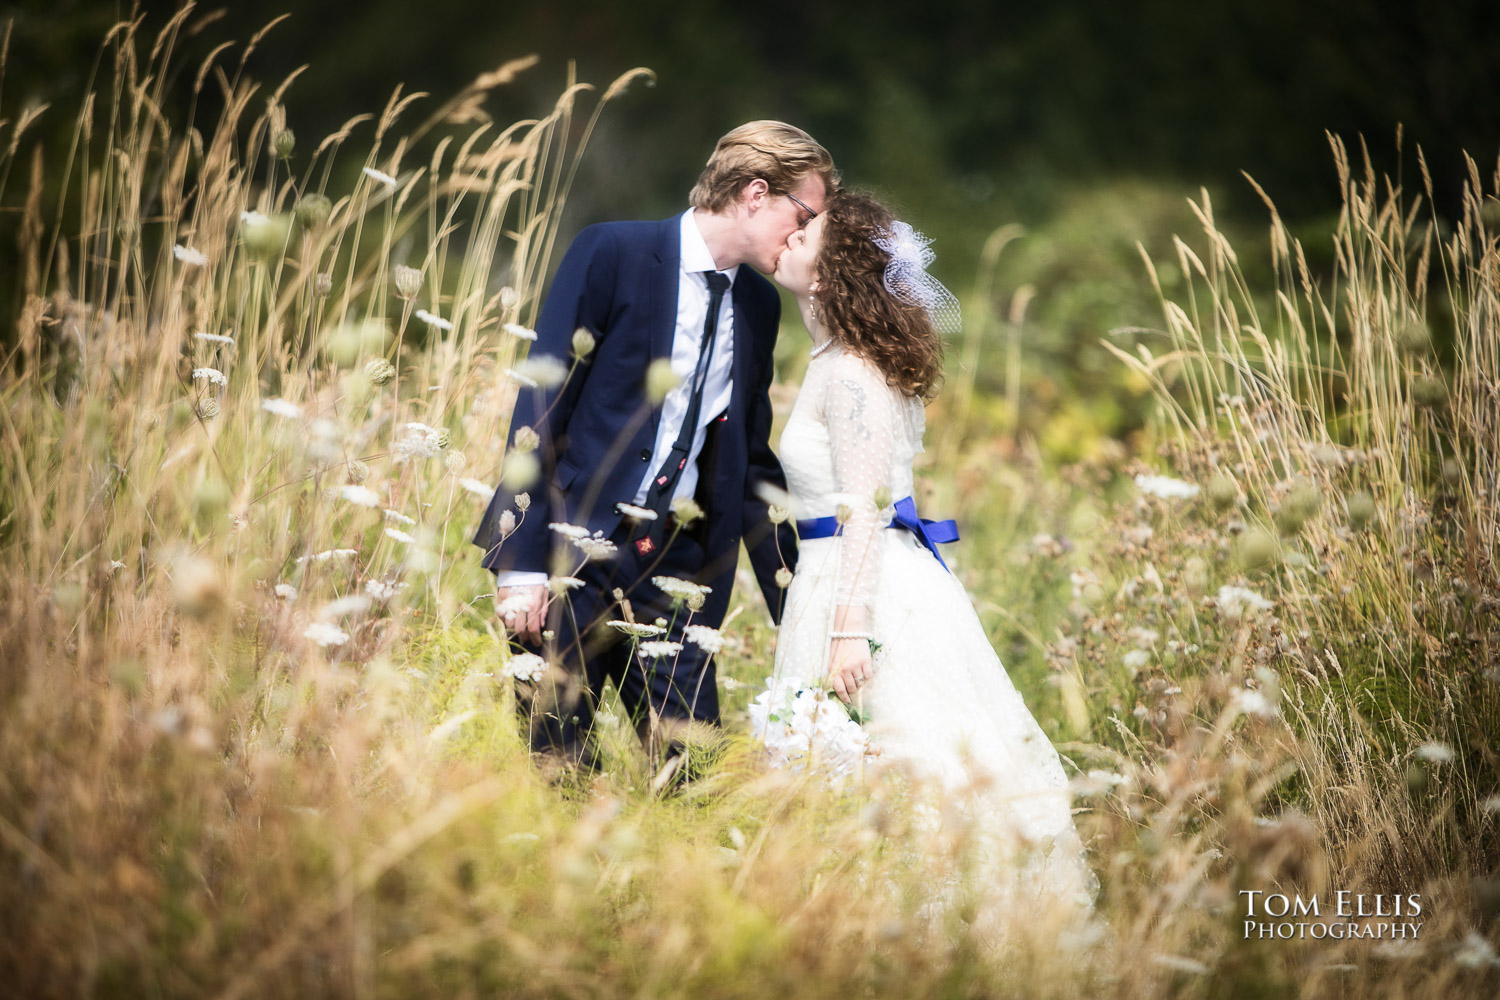 Romantic photo of Bride and groom sharing a kiss while standing in a field of tall grass at Seattle's Magnuson Park